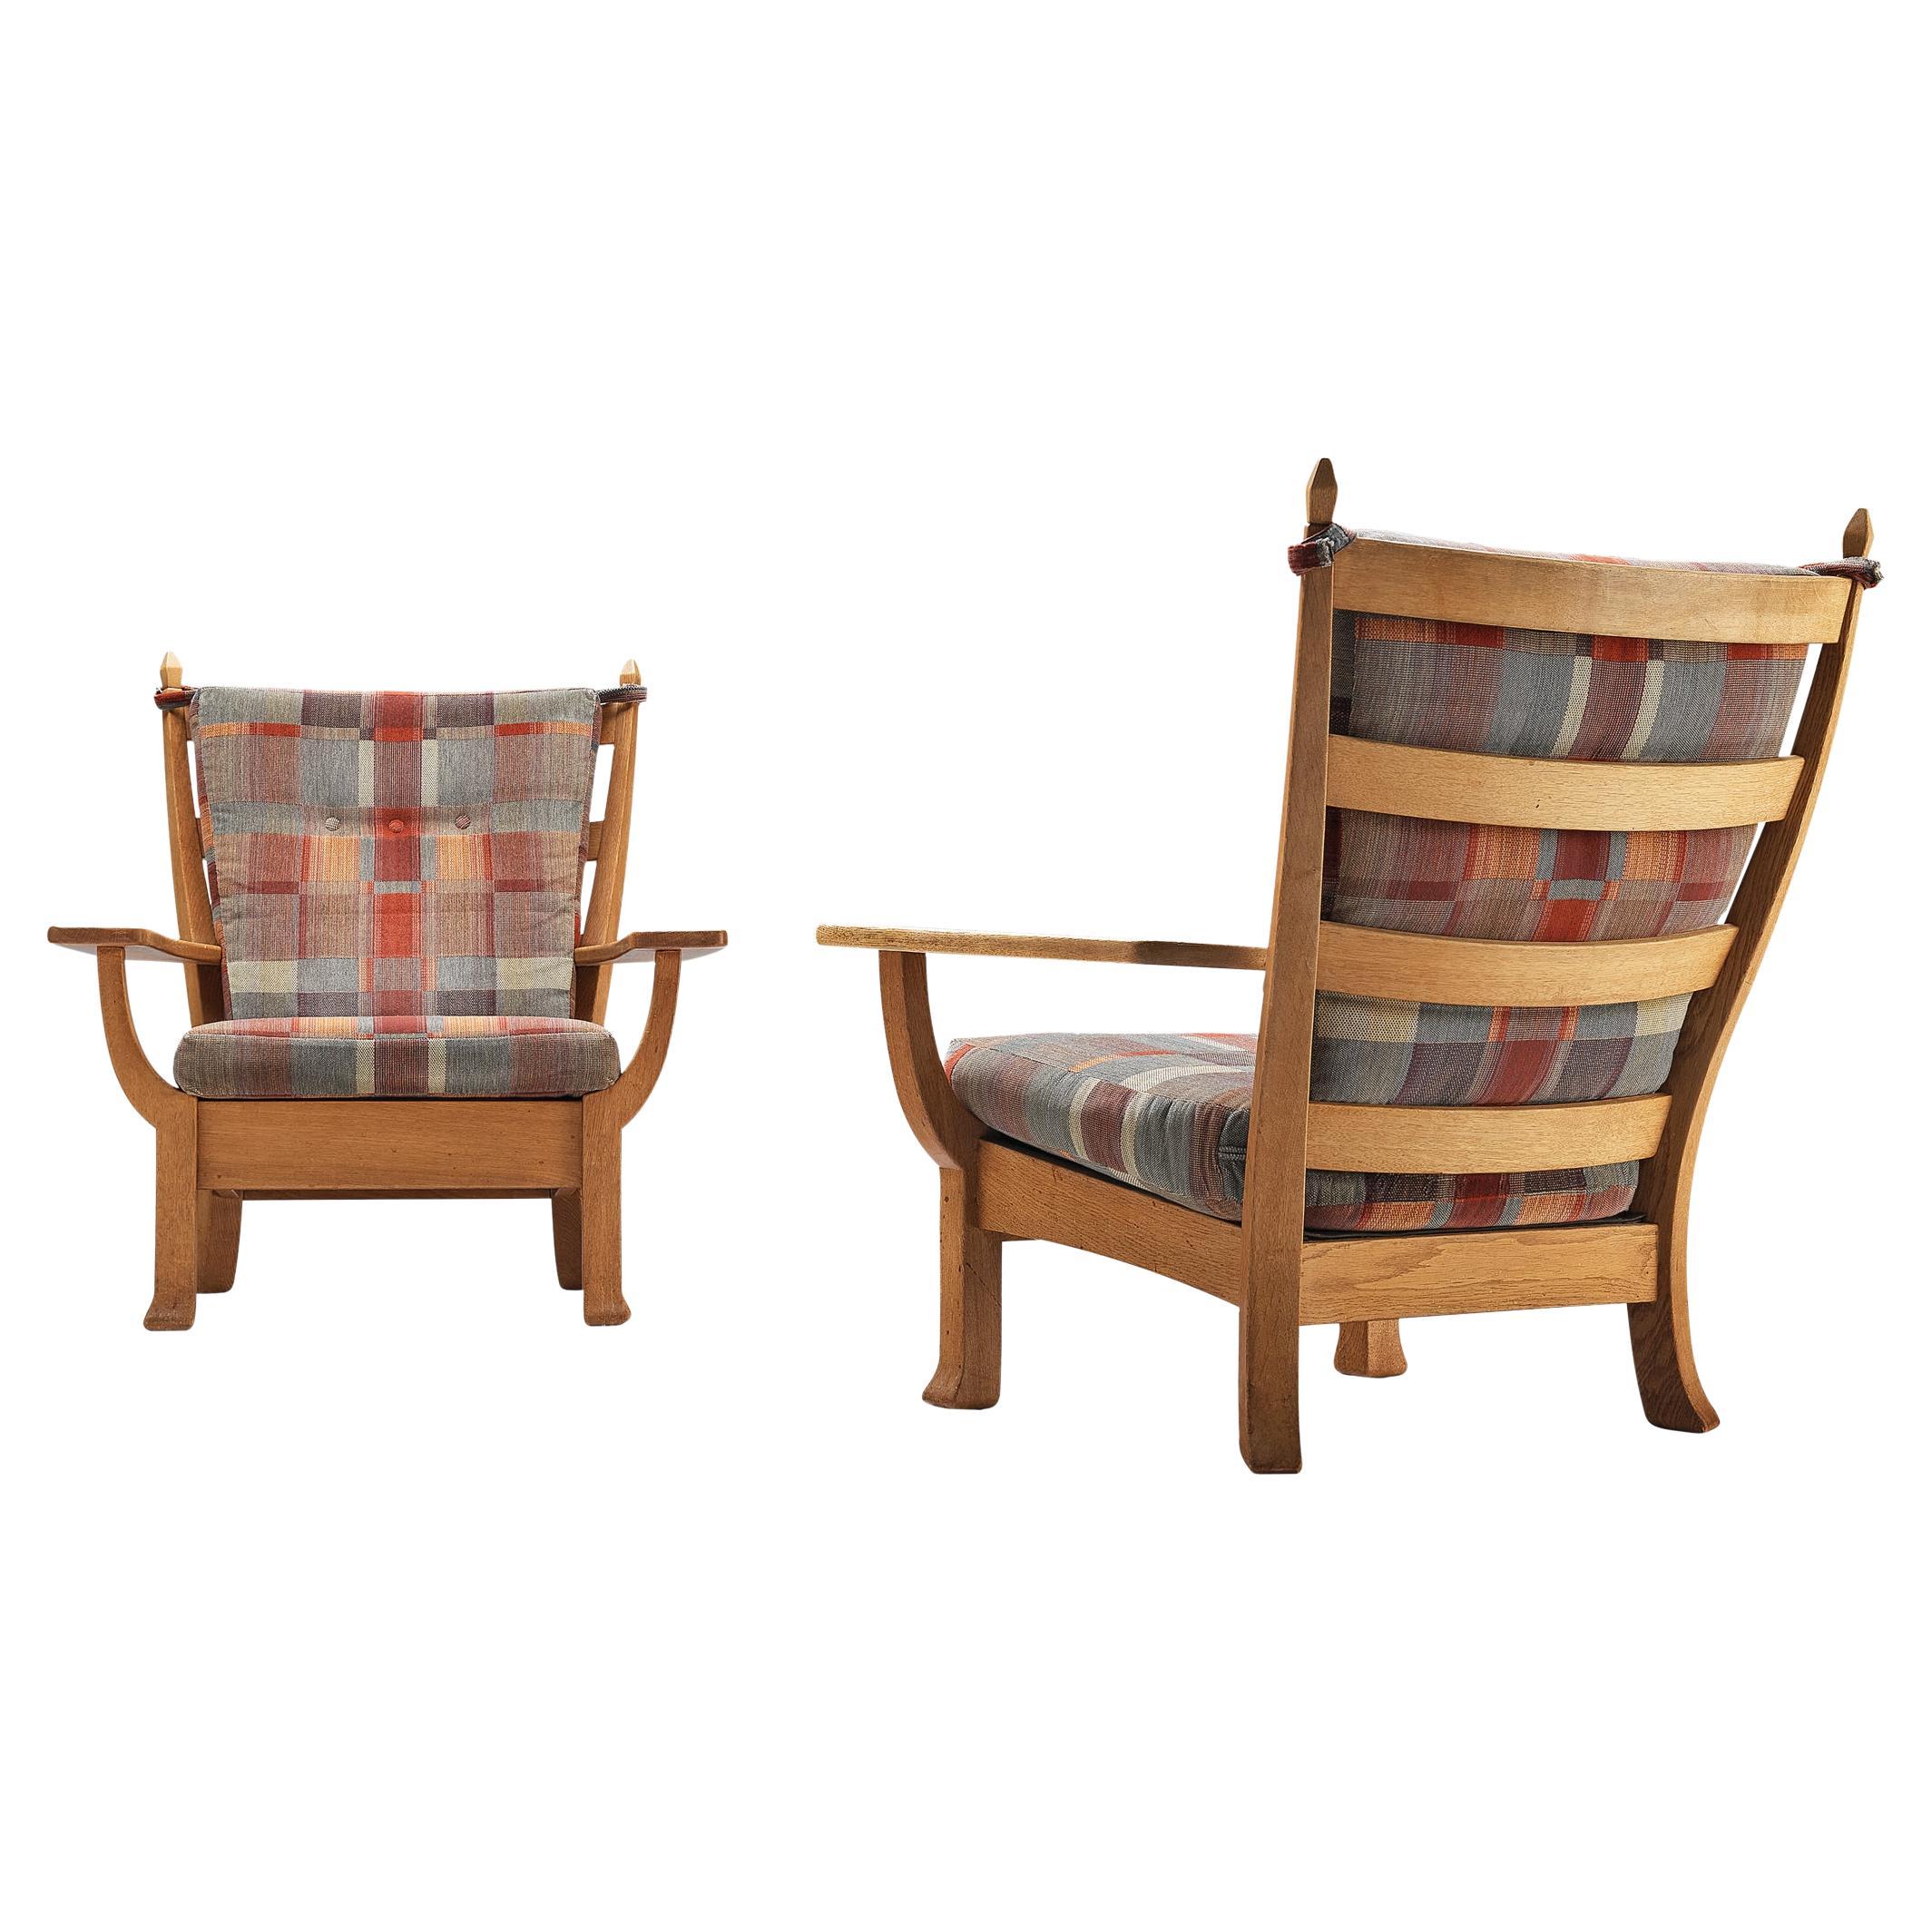 Rustic Pair of Armchairs in Oak and Soft Colored Upholstery 